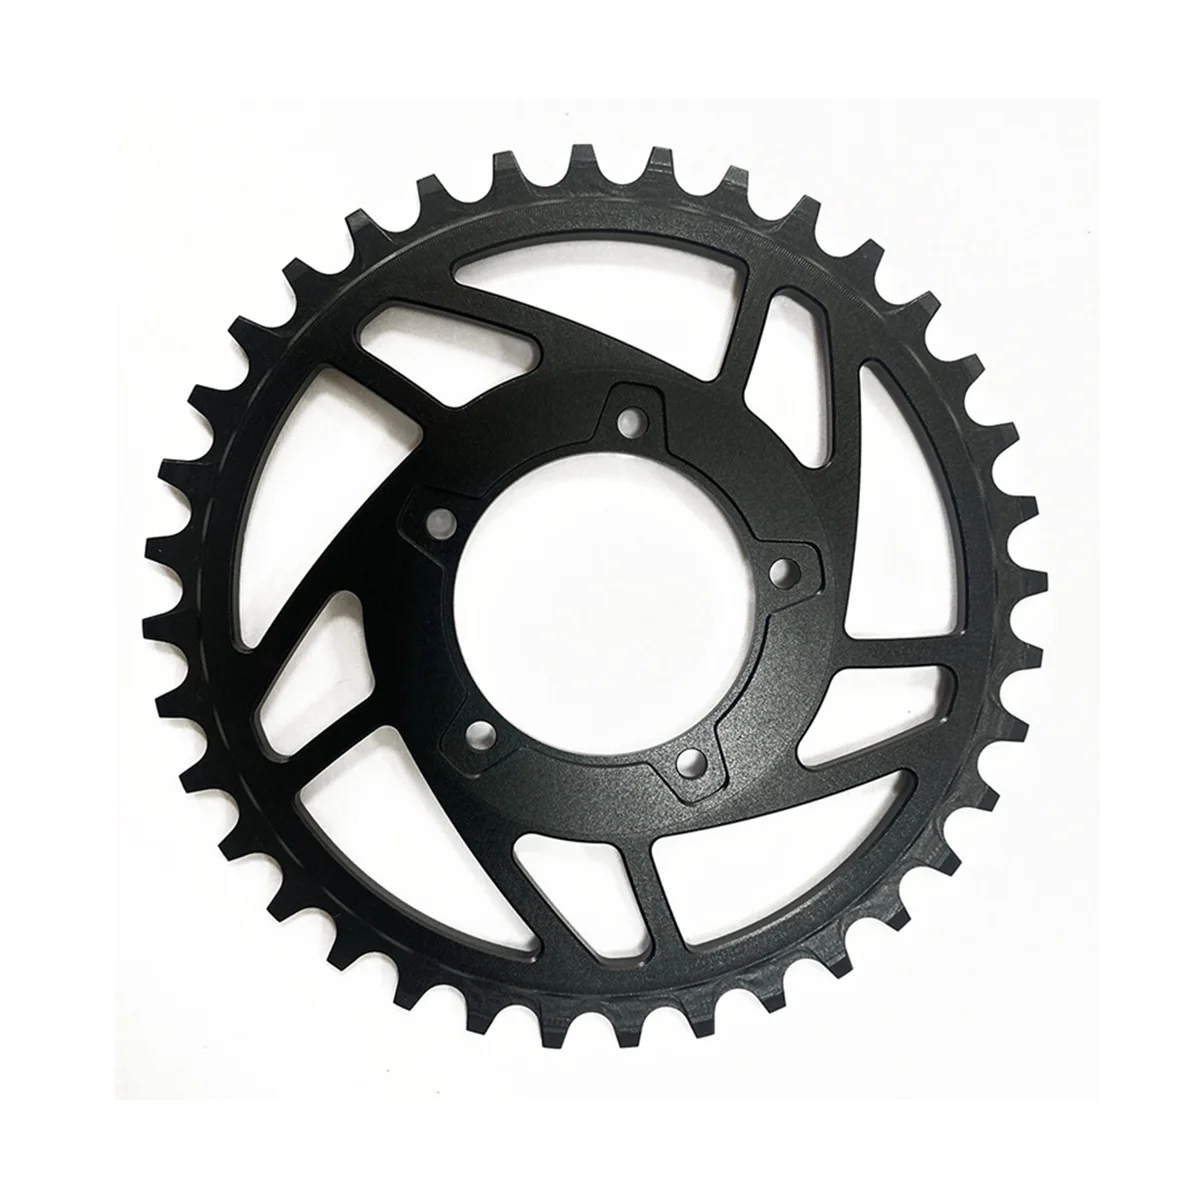 

36 Teeth for Bafang Middle Motor BBS 01 02 Series 36T Chainring Aluminum Alloy 6061-T6 Positive and Negative Teeth